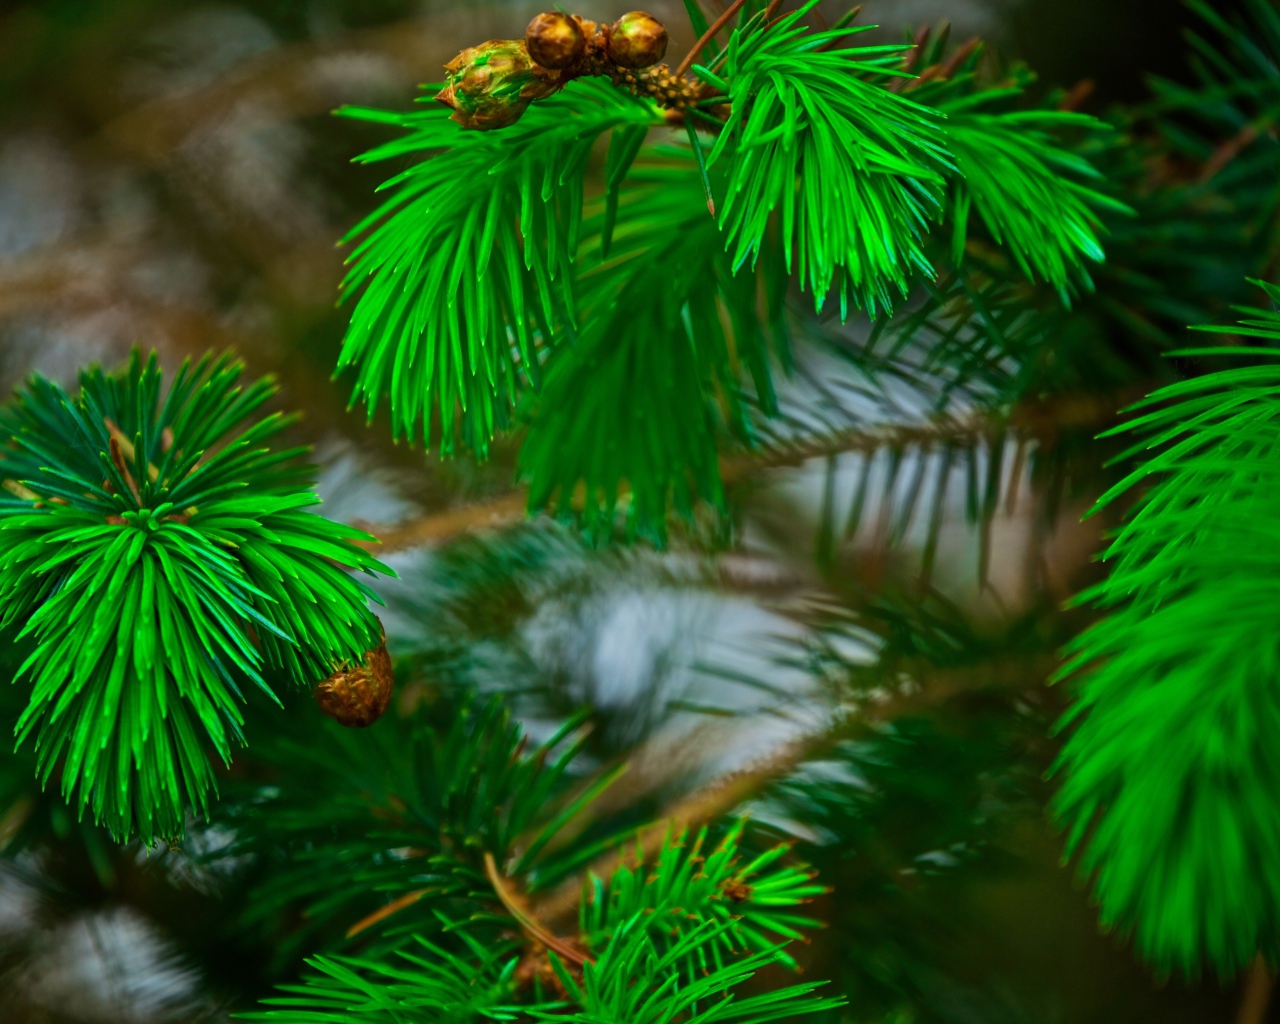 Green pine needles on the branches with cones